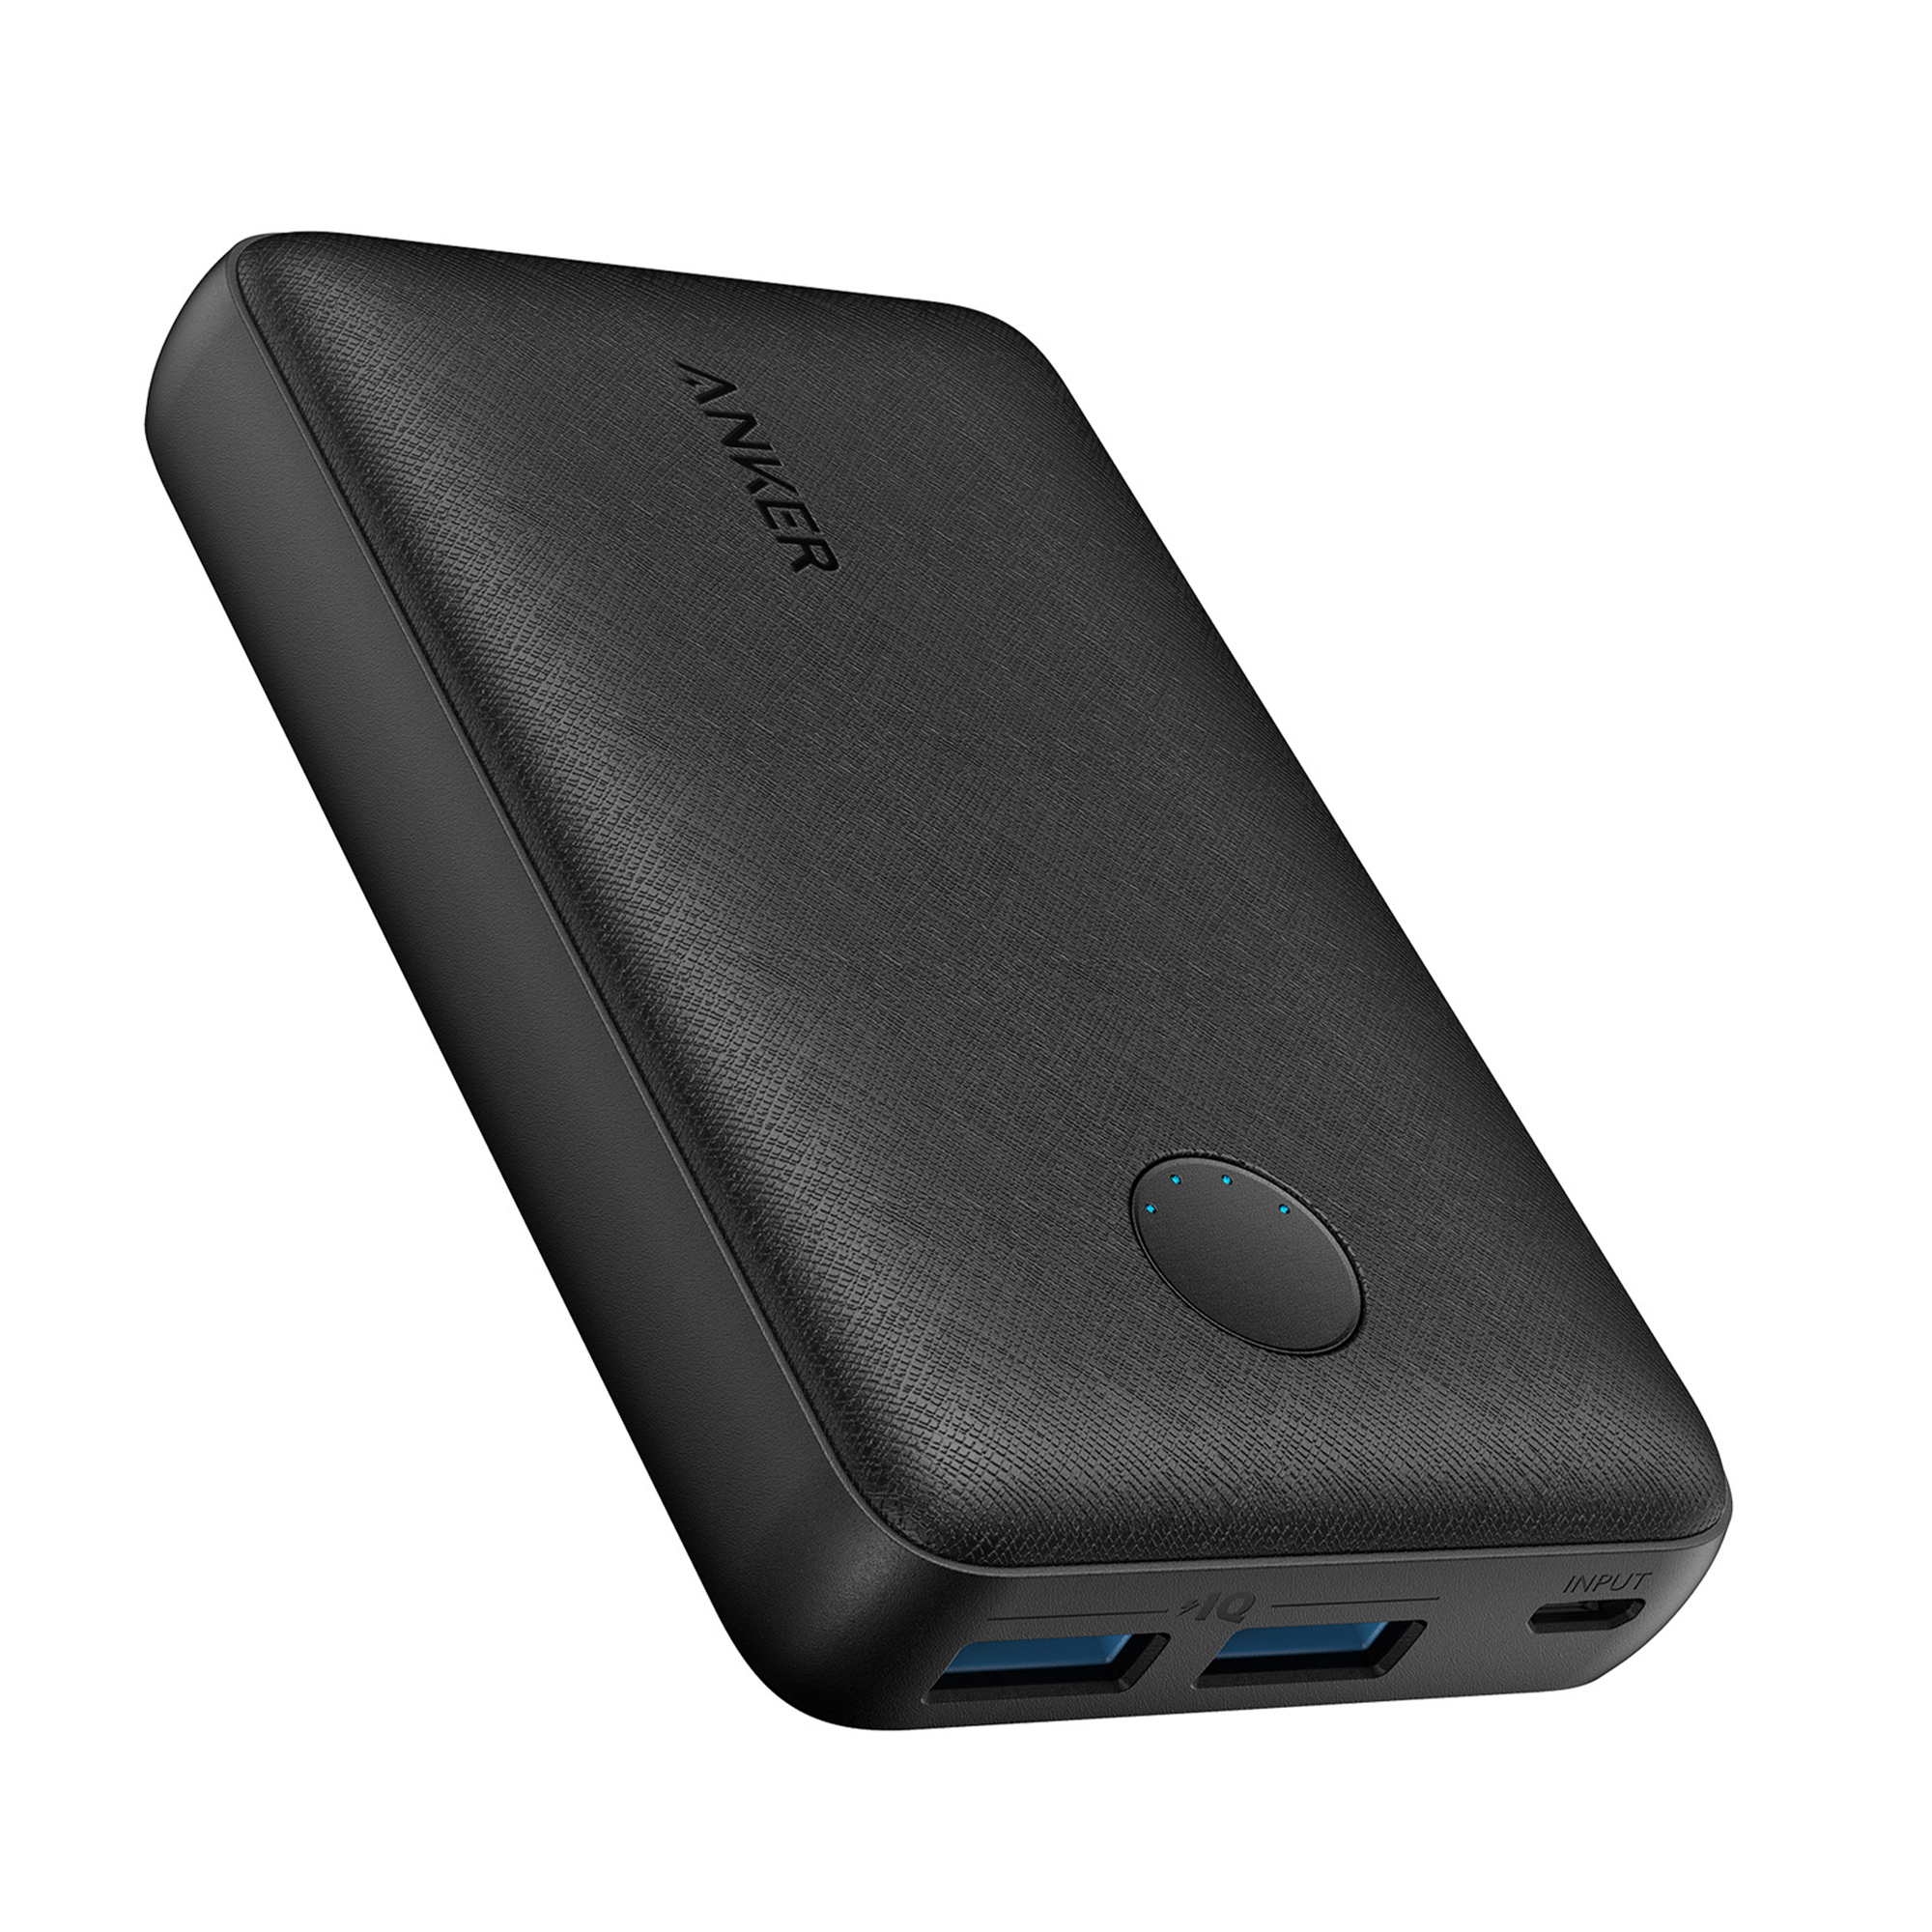 Anker PowerCore Select 10000 Portable Charger - Black, Ultra-Compact, High-Speed Charging Technology Phone Charger for iPhone, Samsung and More. - image 1 of 6